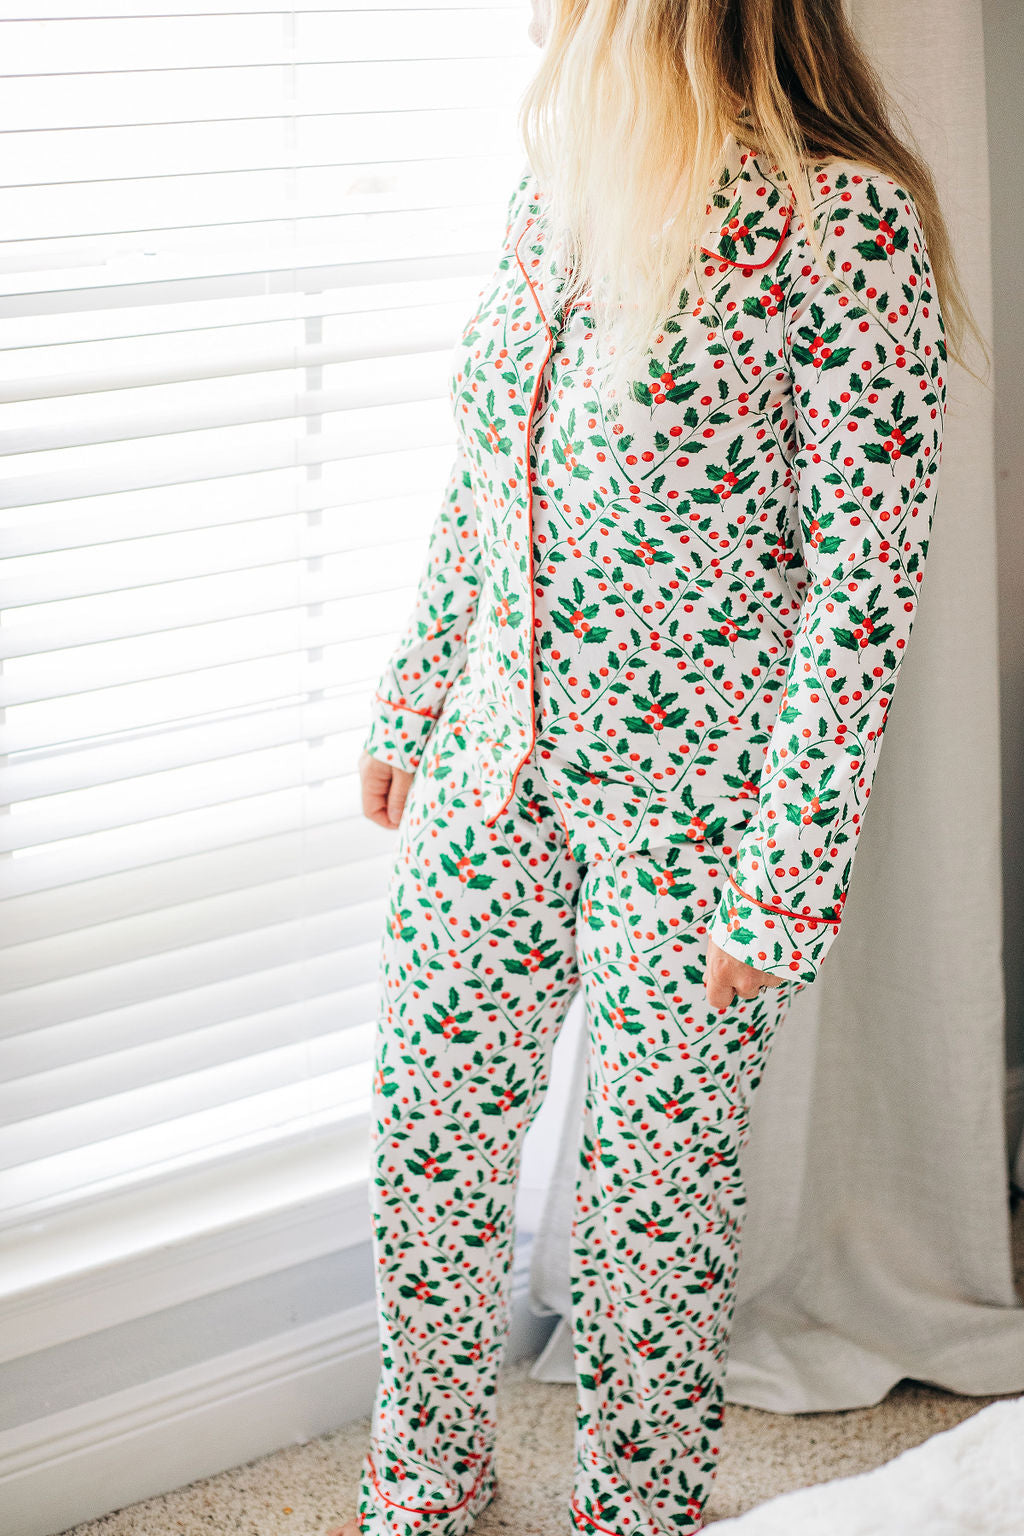 Holly Pattern  - Button Down PJs